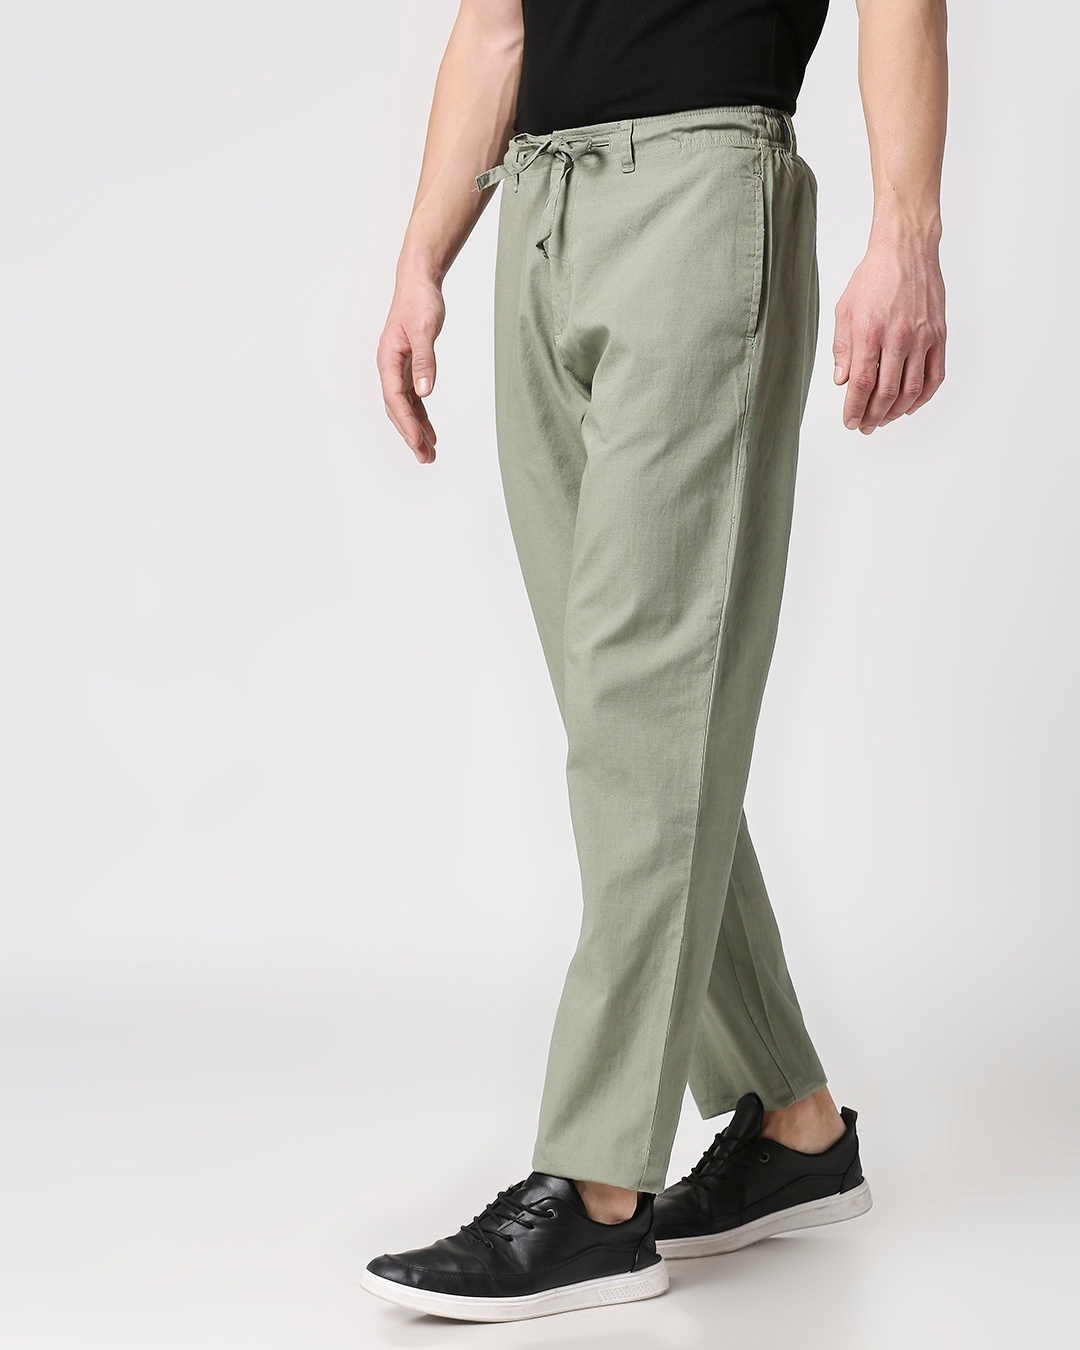 Buy GREY Trousers & Pants for Men by Rare Rabbit Online | Ajio.com